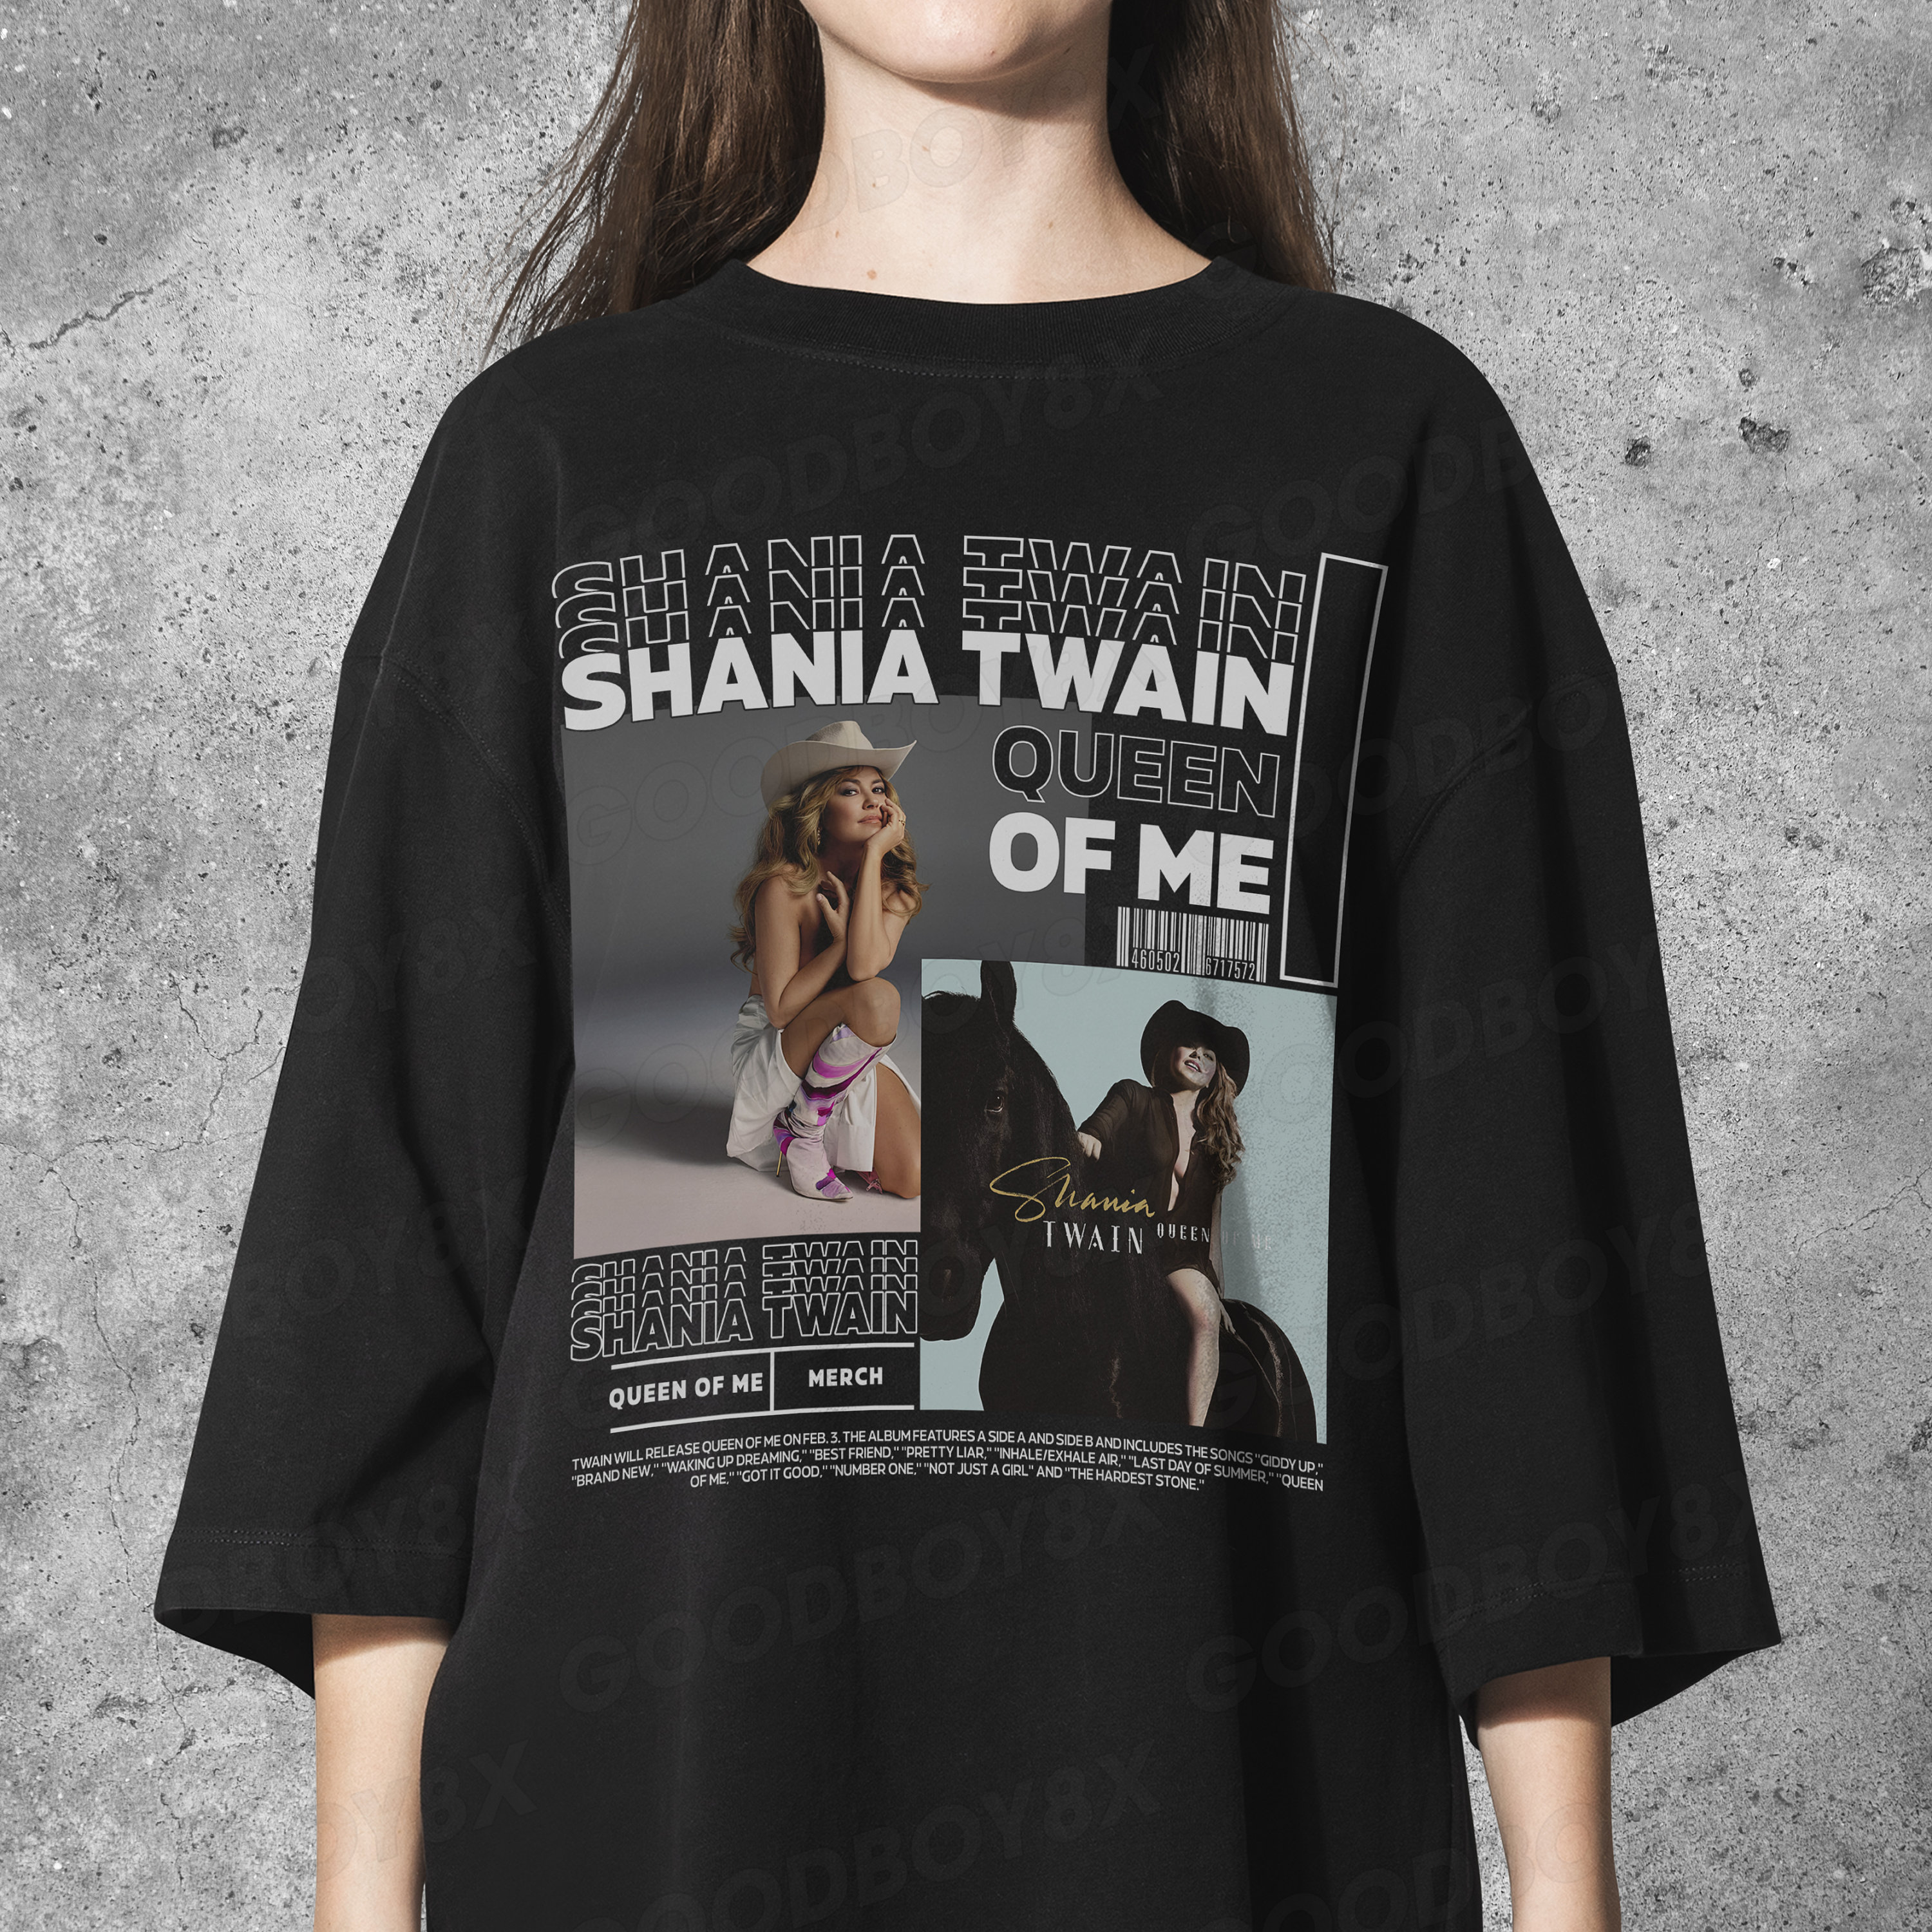 Vintage Shania Twain Queen of Me Tour Shirt Queen of Me Tour image